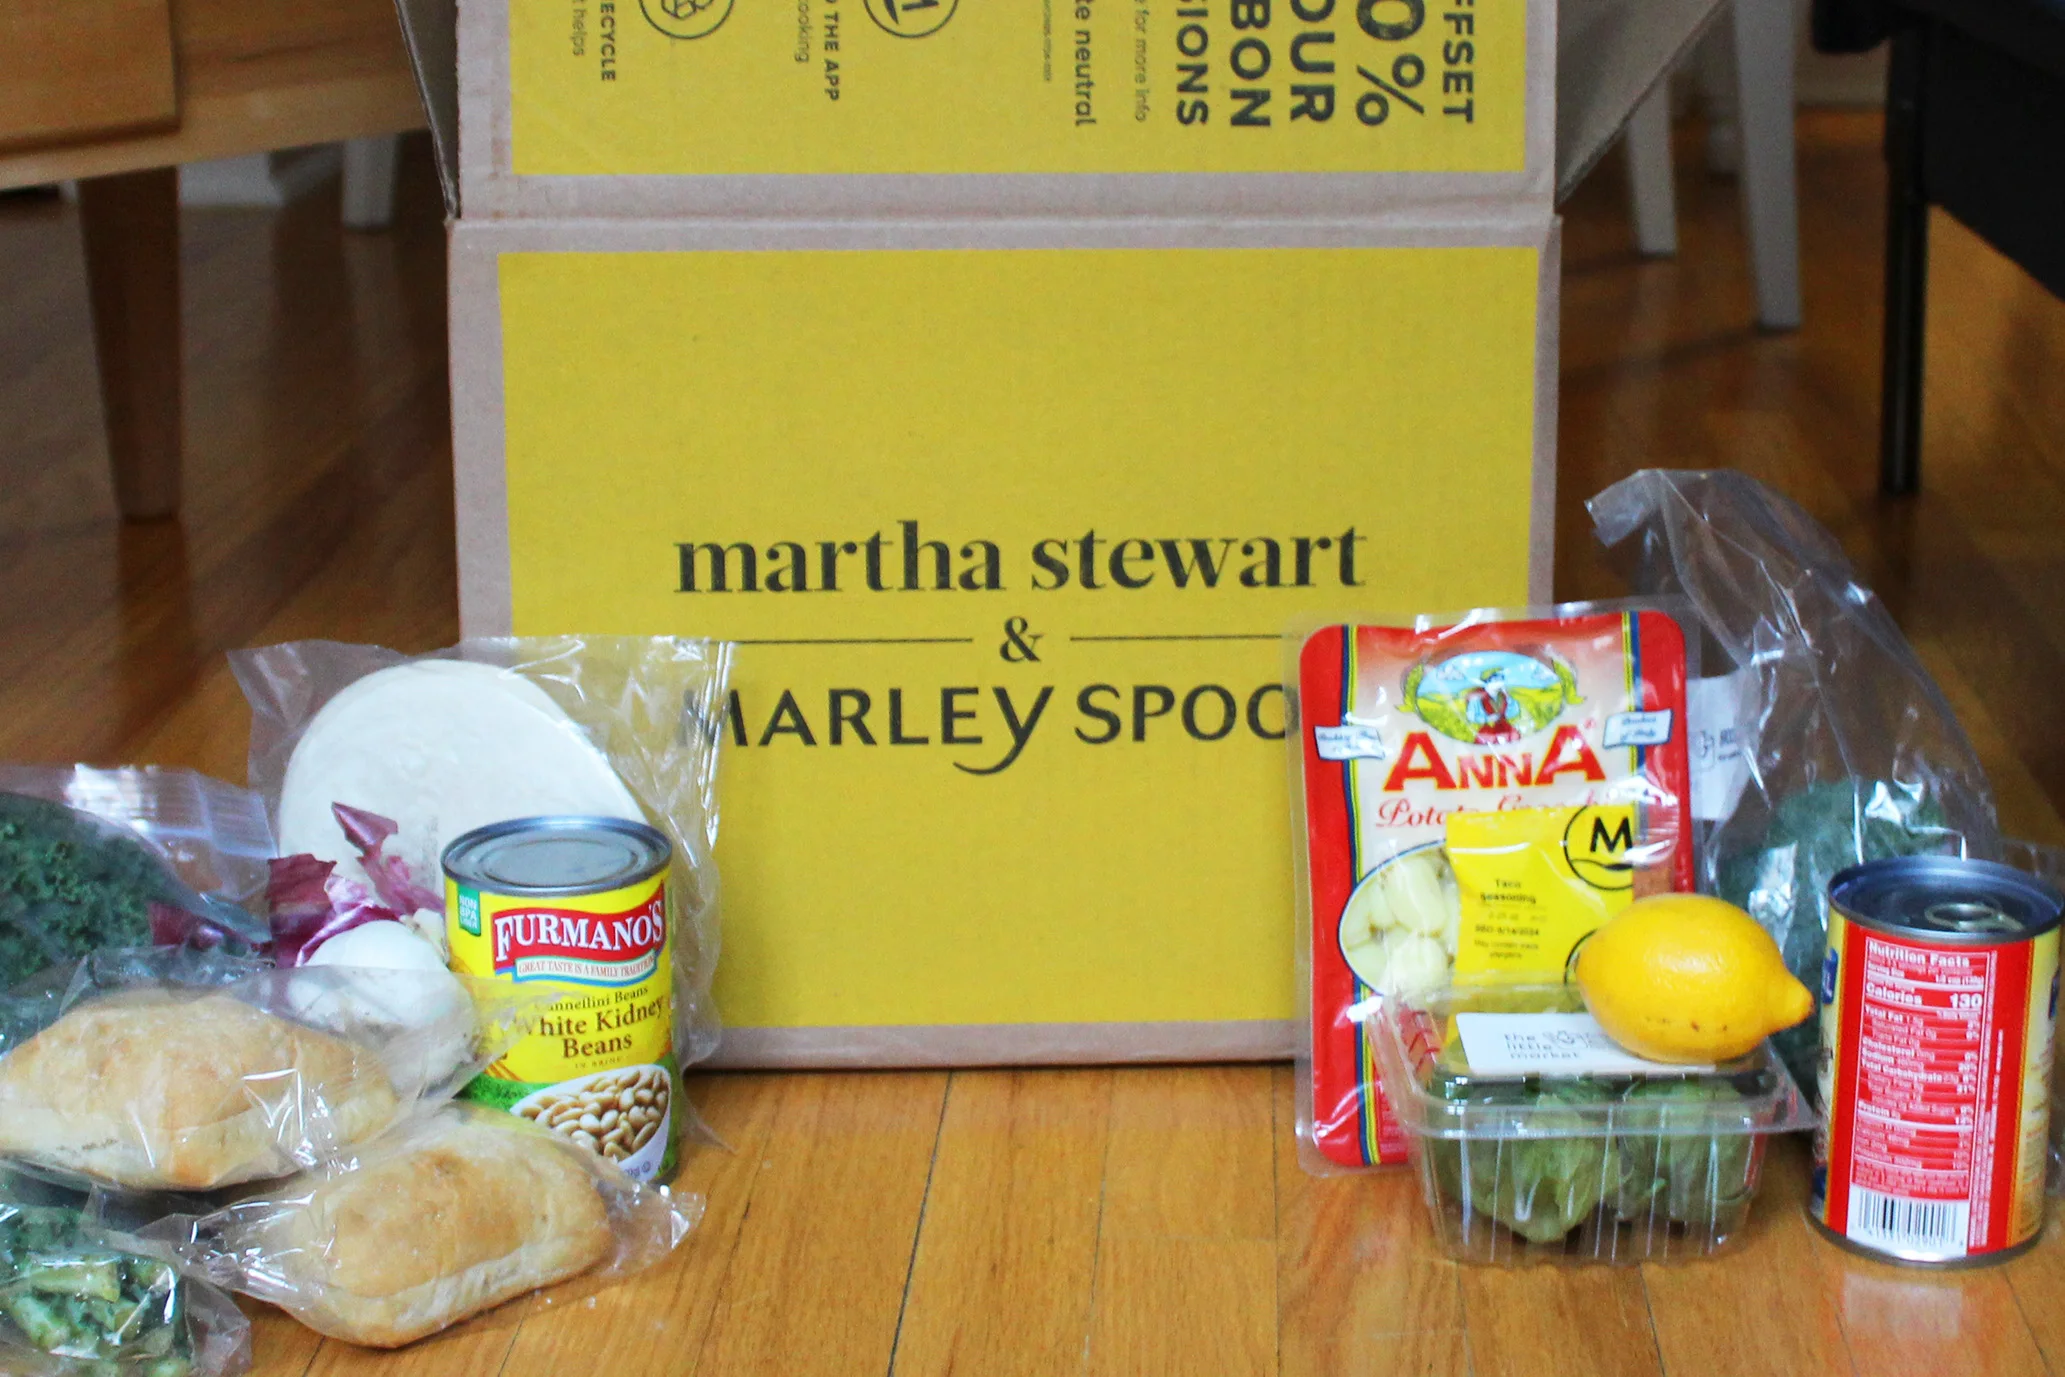 A yellow Martha Stewart x Marley Spoon box with ingredients laied out in front of it